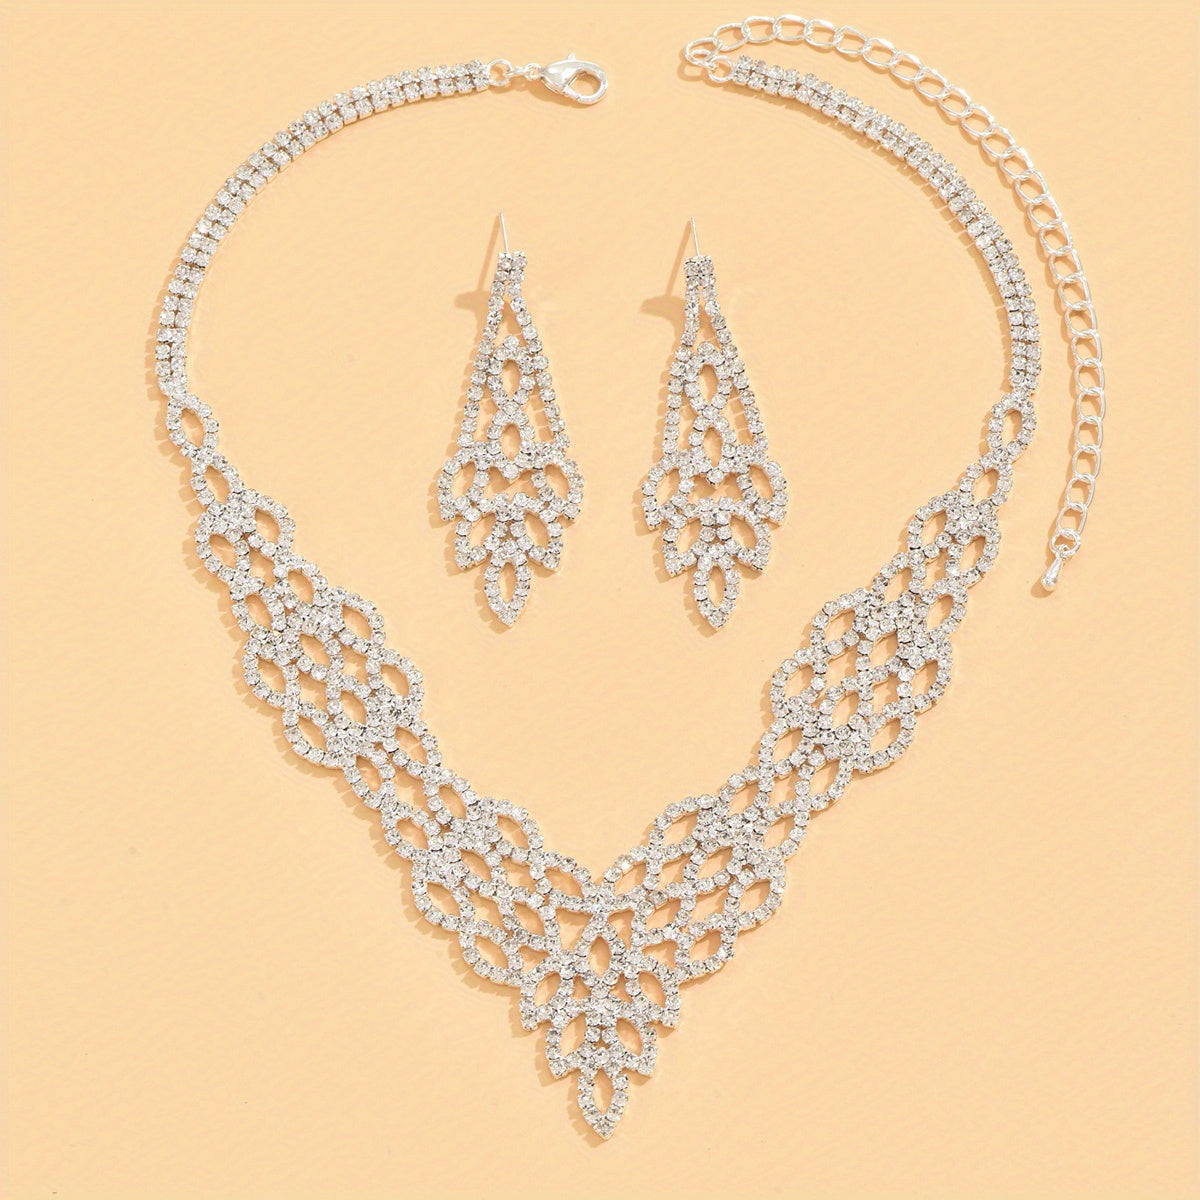 Exaggerated Rhinestones Jewelry Set With Pendant Necklace & Drop Earrings Mother's Day Gift